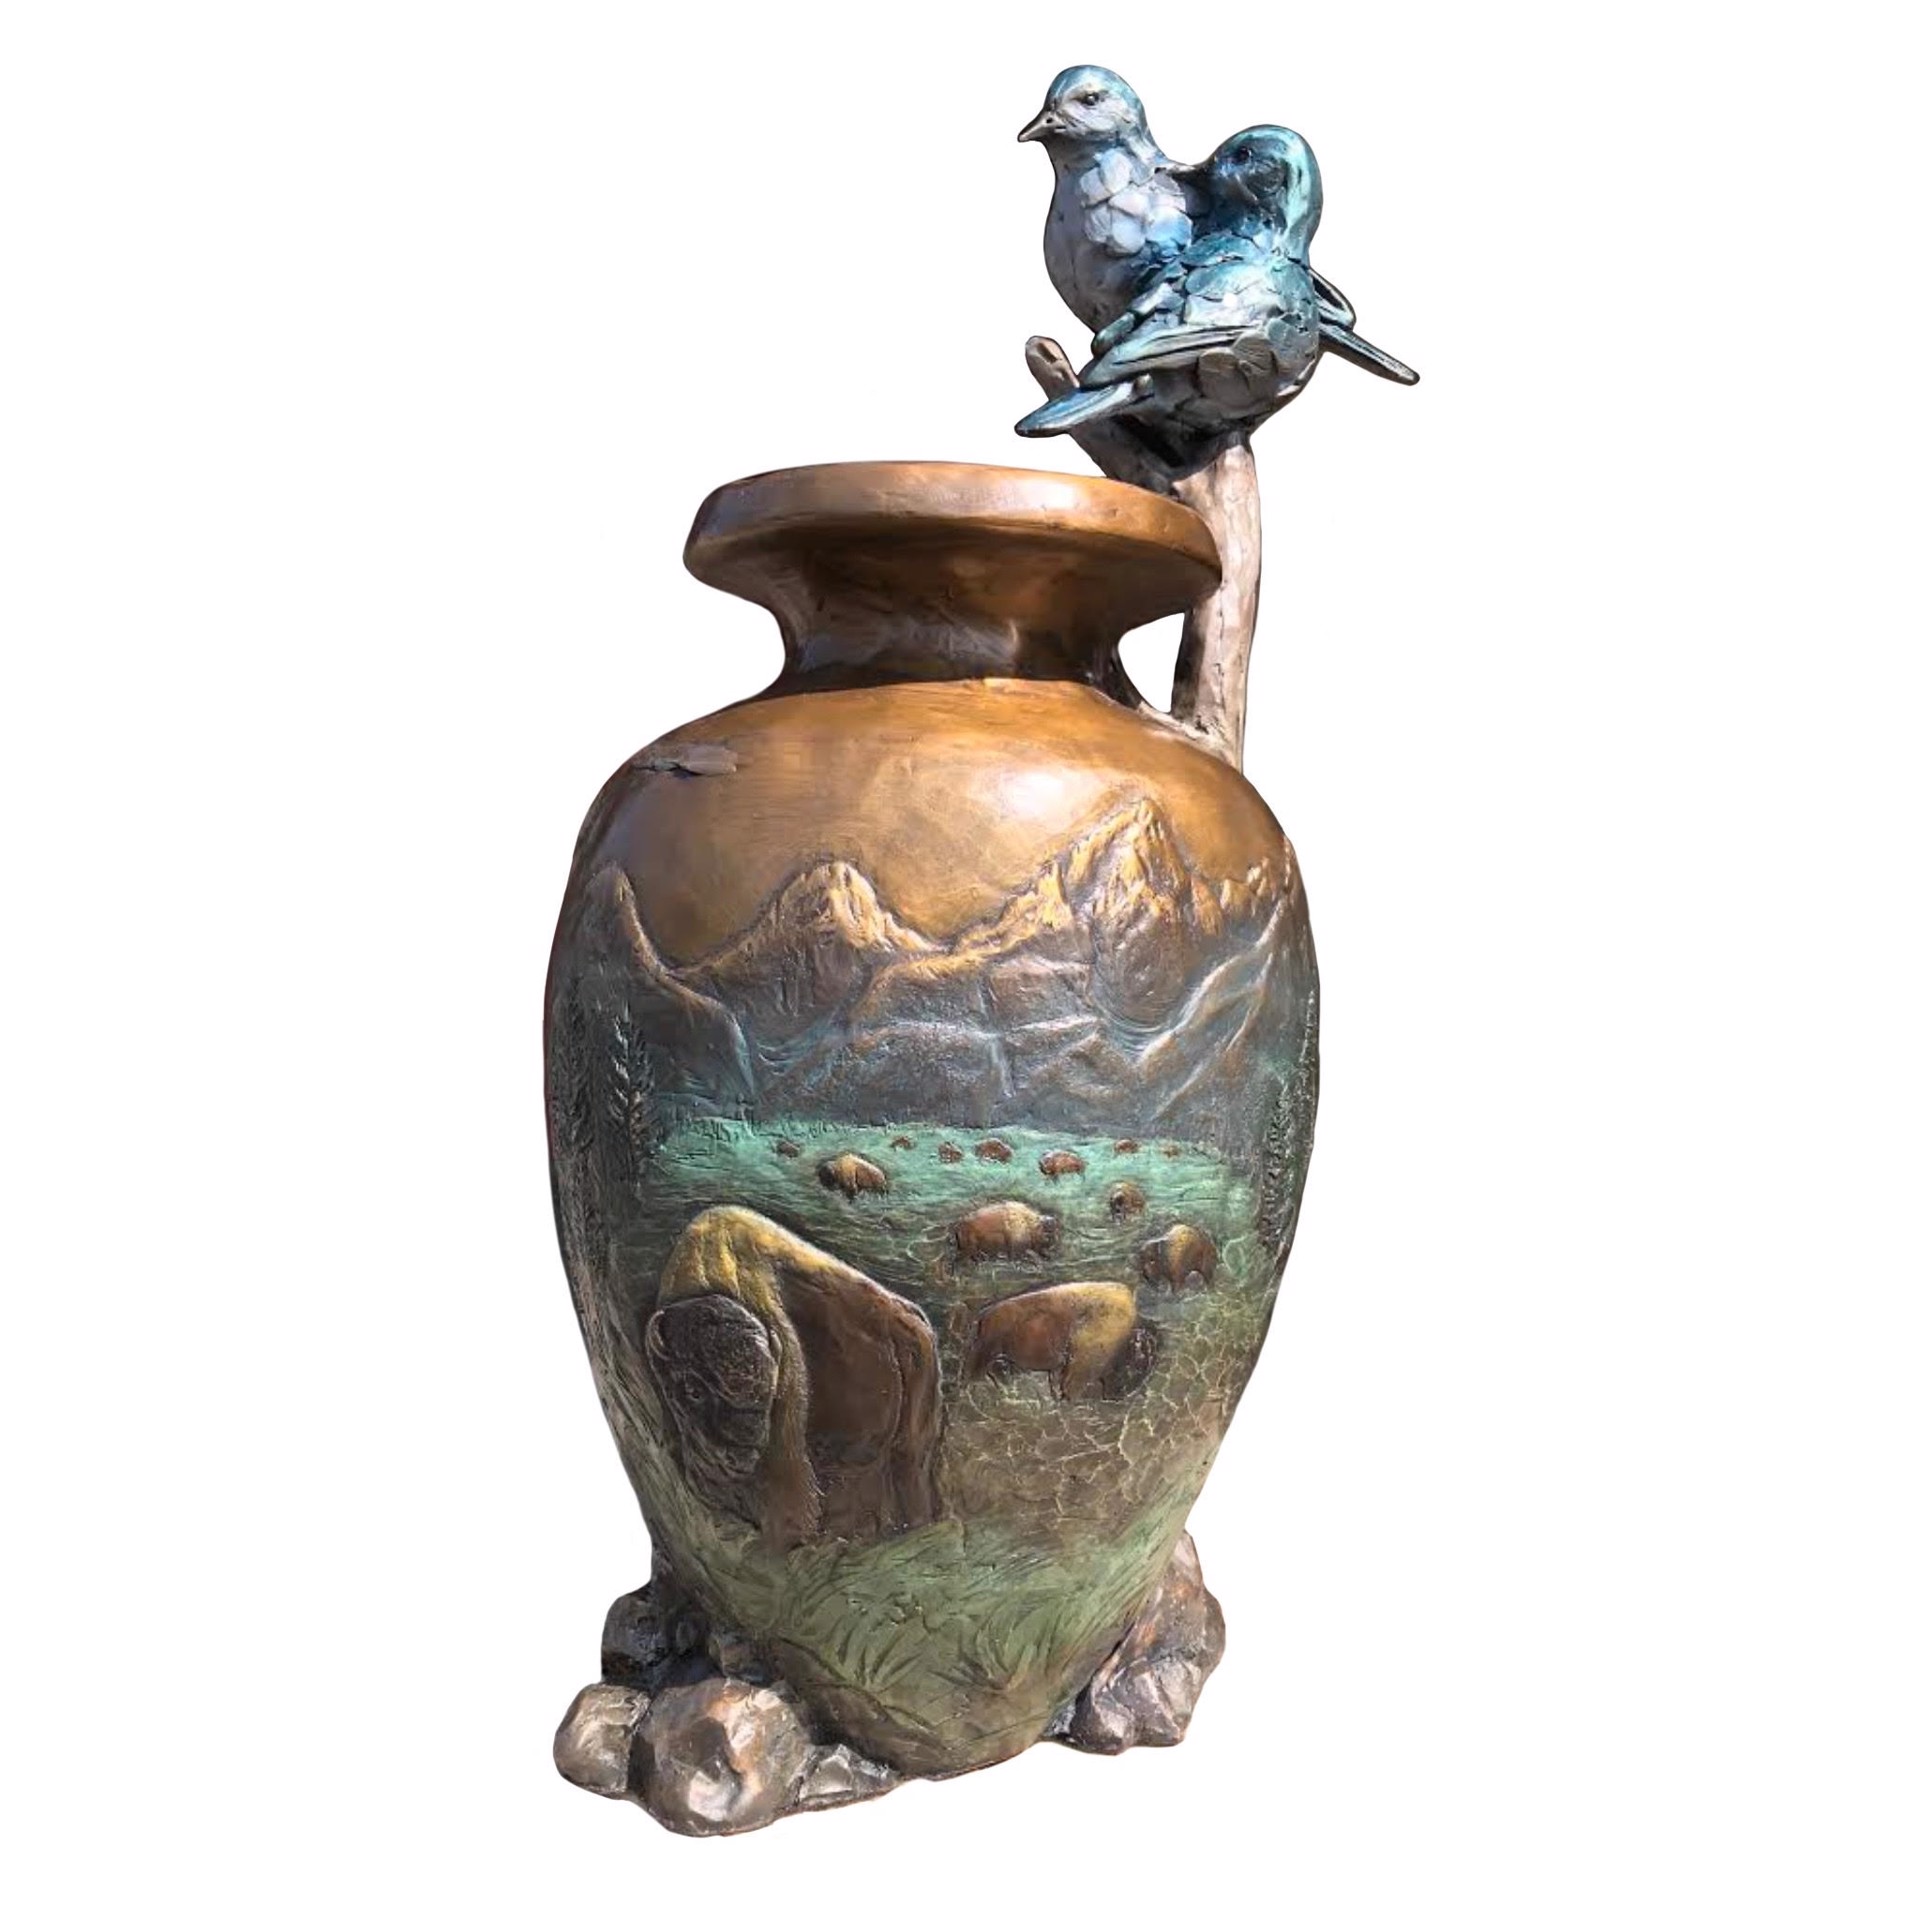 Original Limited Edition Bronze Of Blue Bird Branch On A Vase By Rip And Alison Caswell Available At Gallery Wild